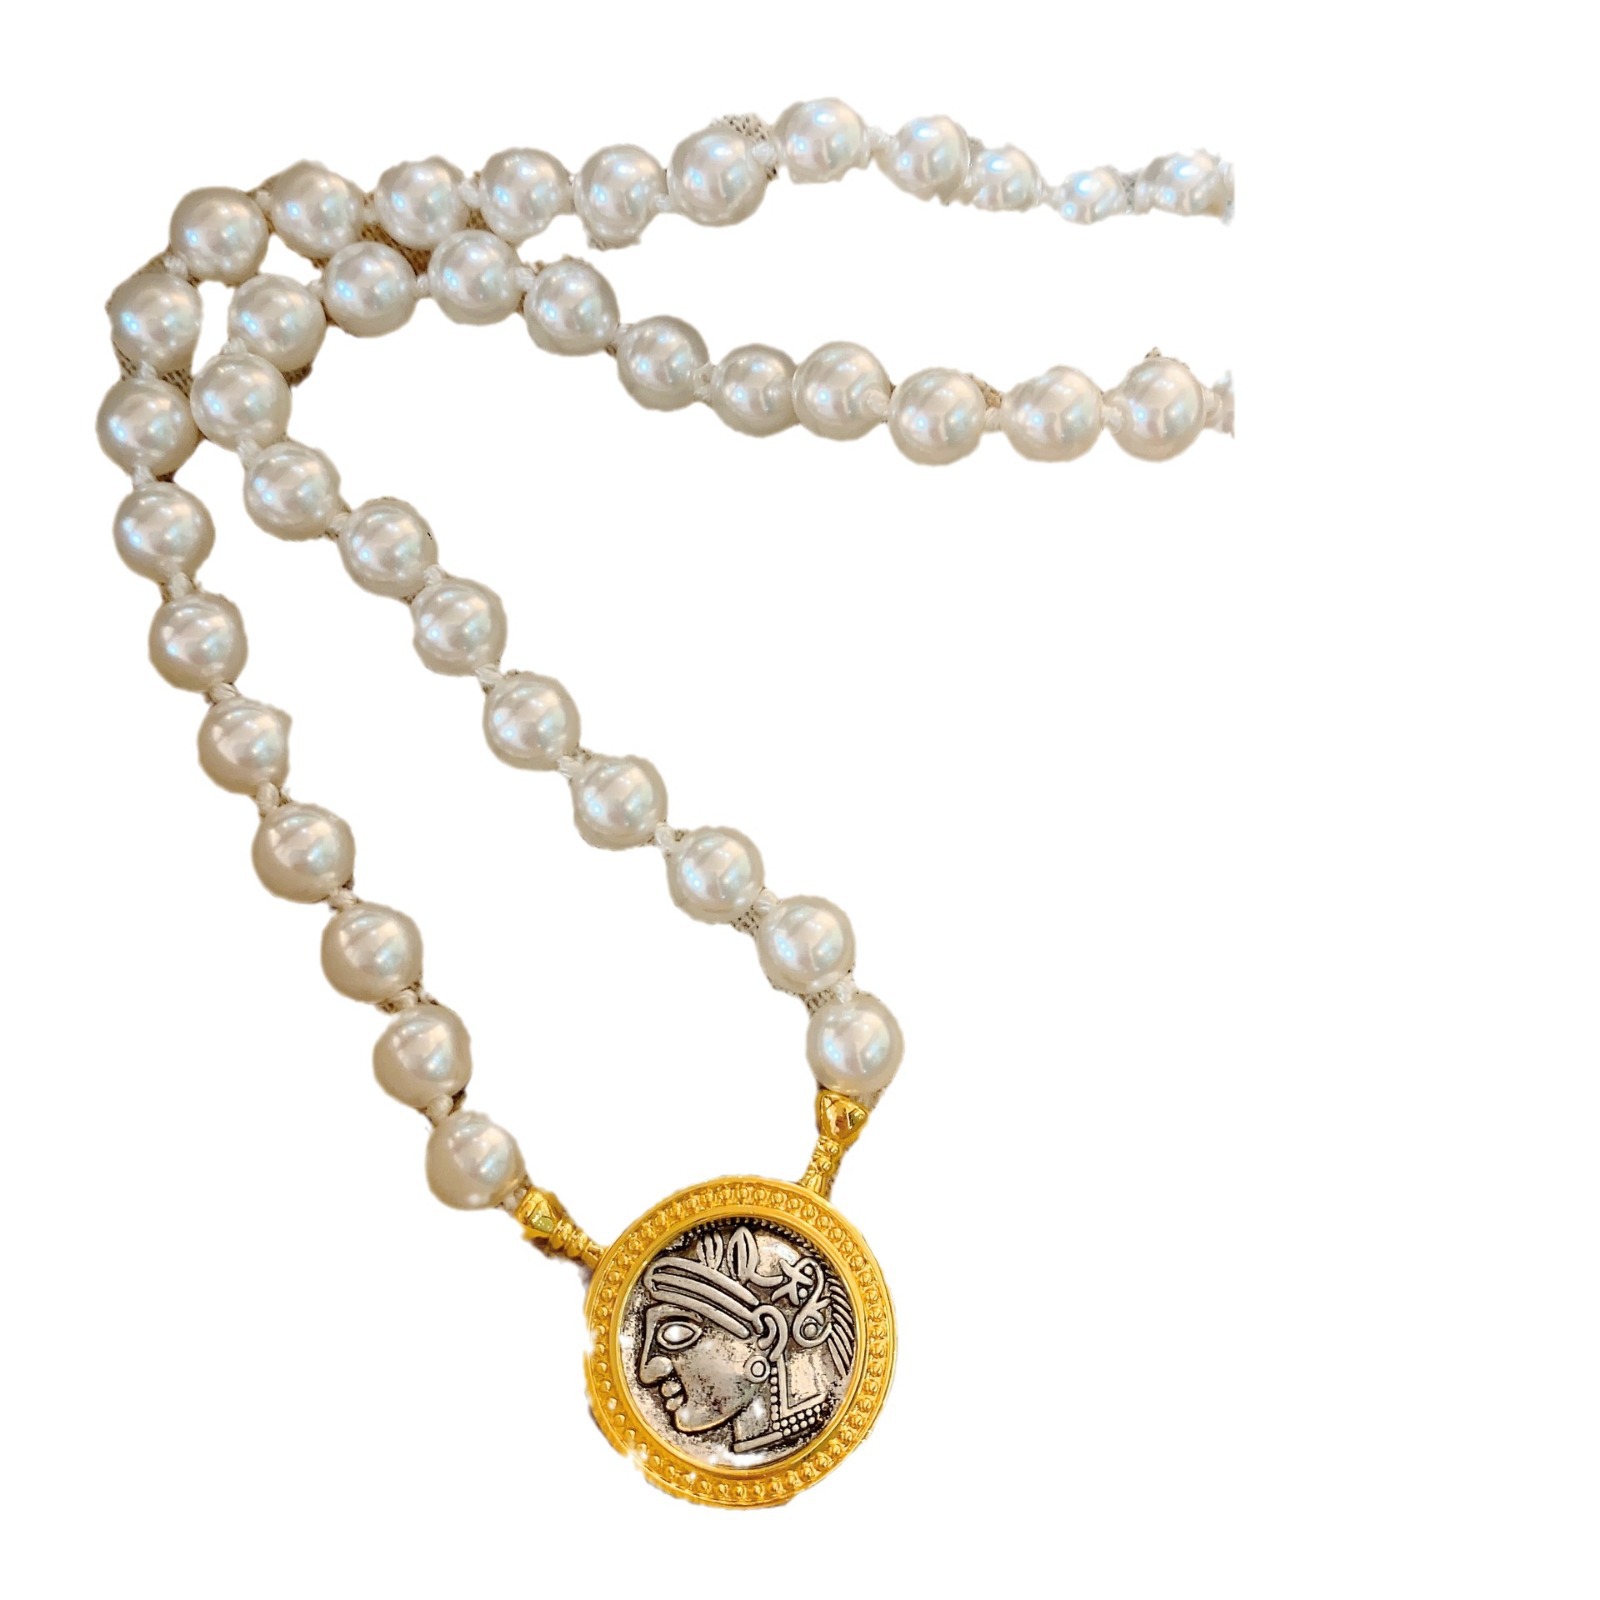 Antique Coin Series Goddess of Victory Knotted Pearl Adjustable Necklace Female Necklace French Retro Easy Matching Reversible